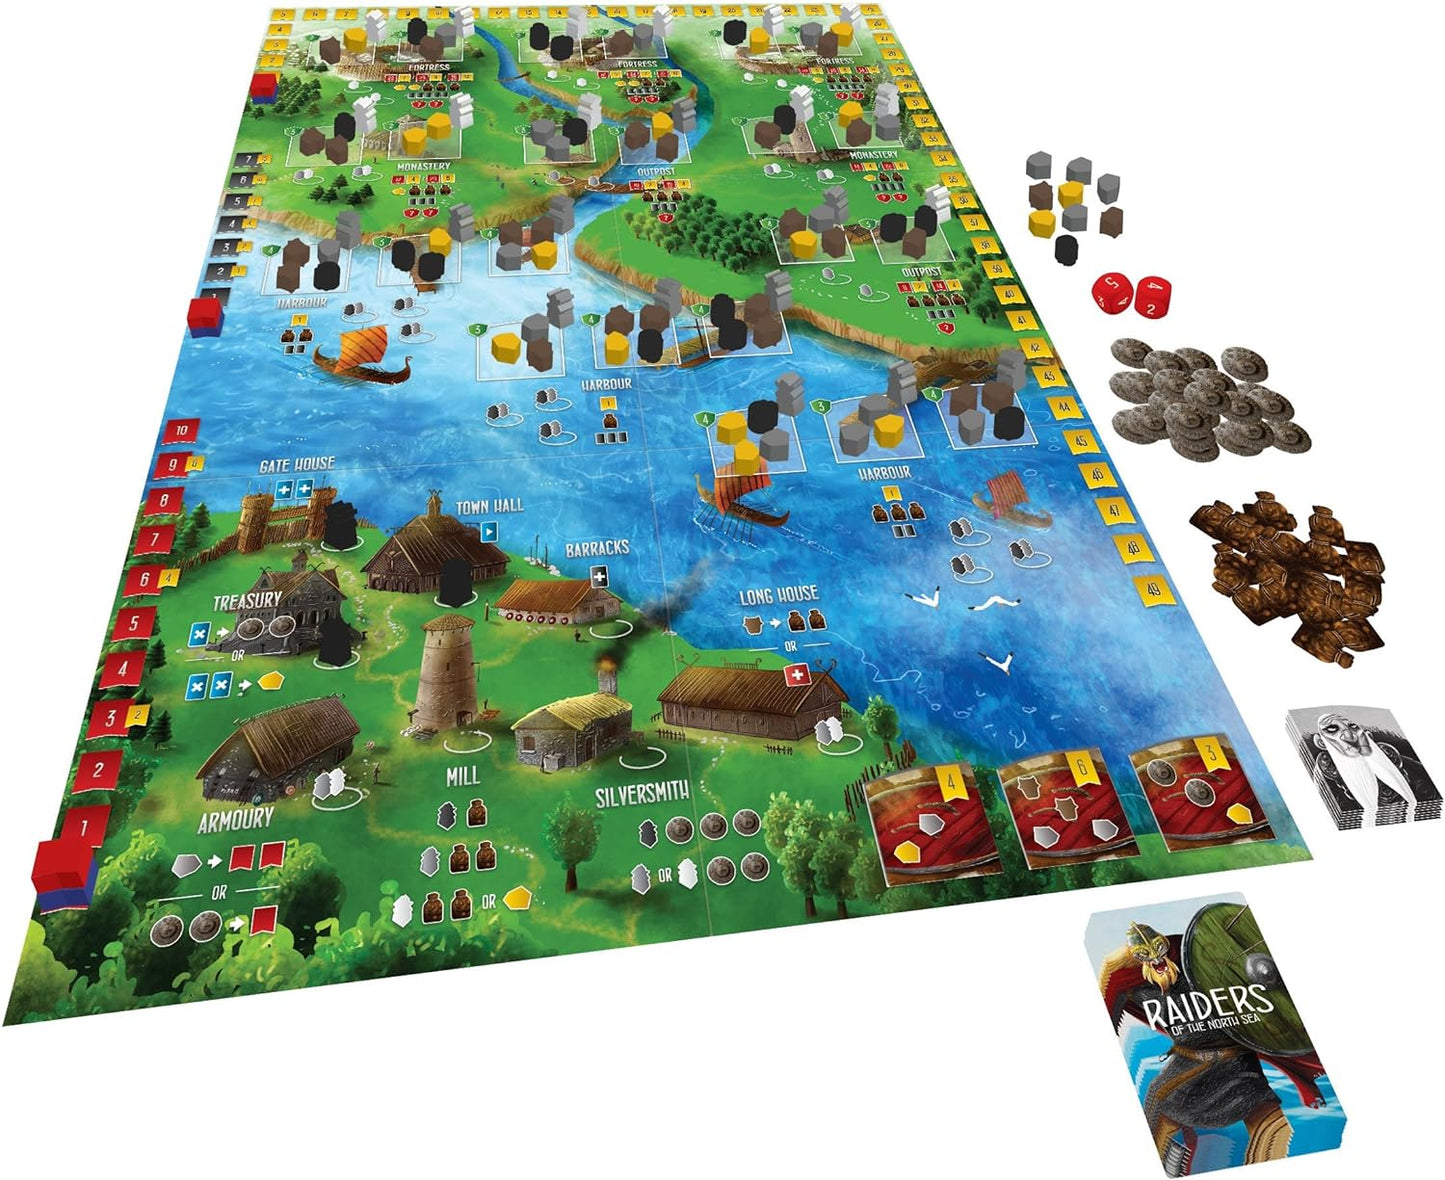 Raiders of the North Sea Board Game. Sold by Board Hoarders